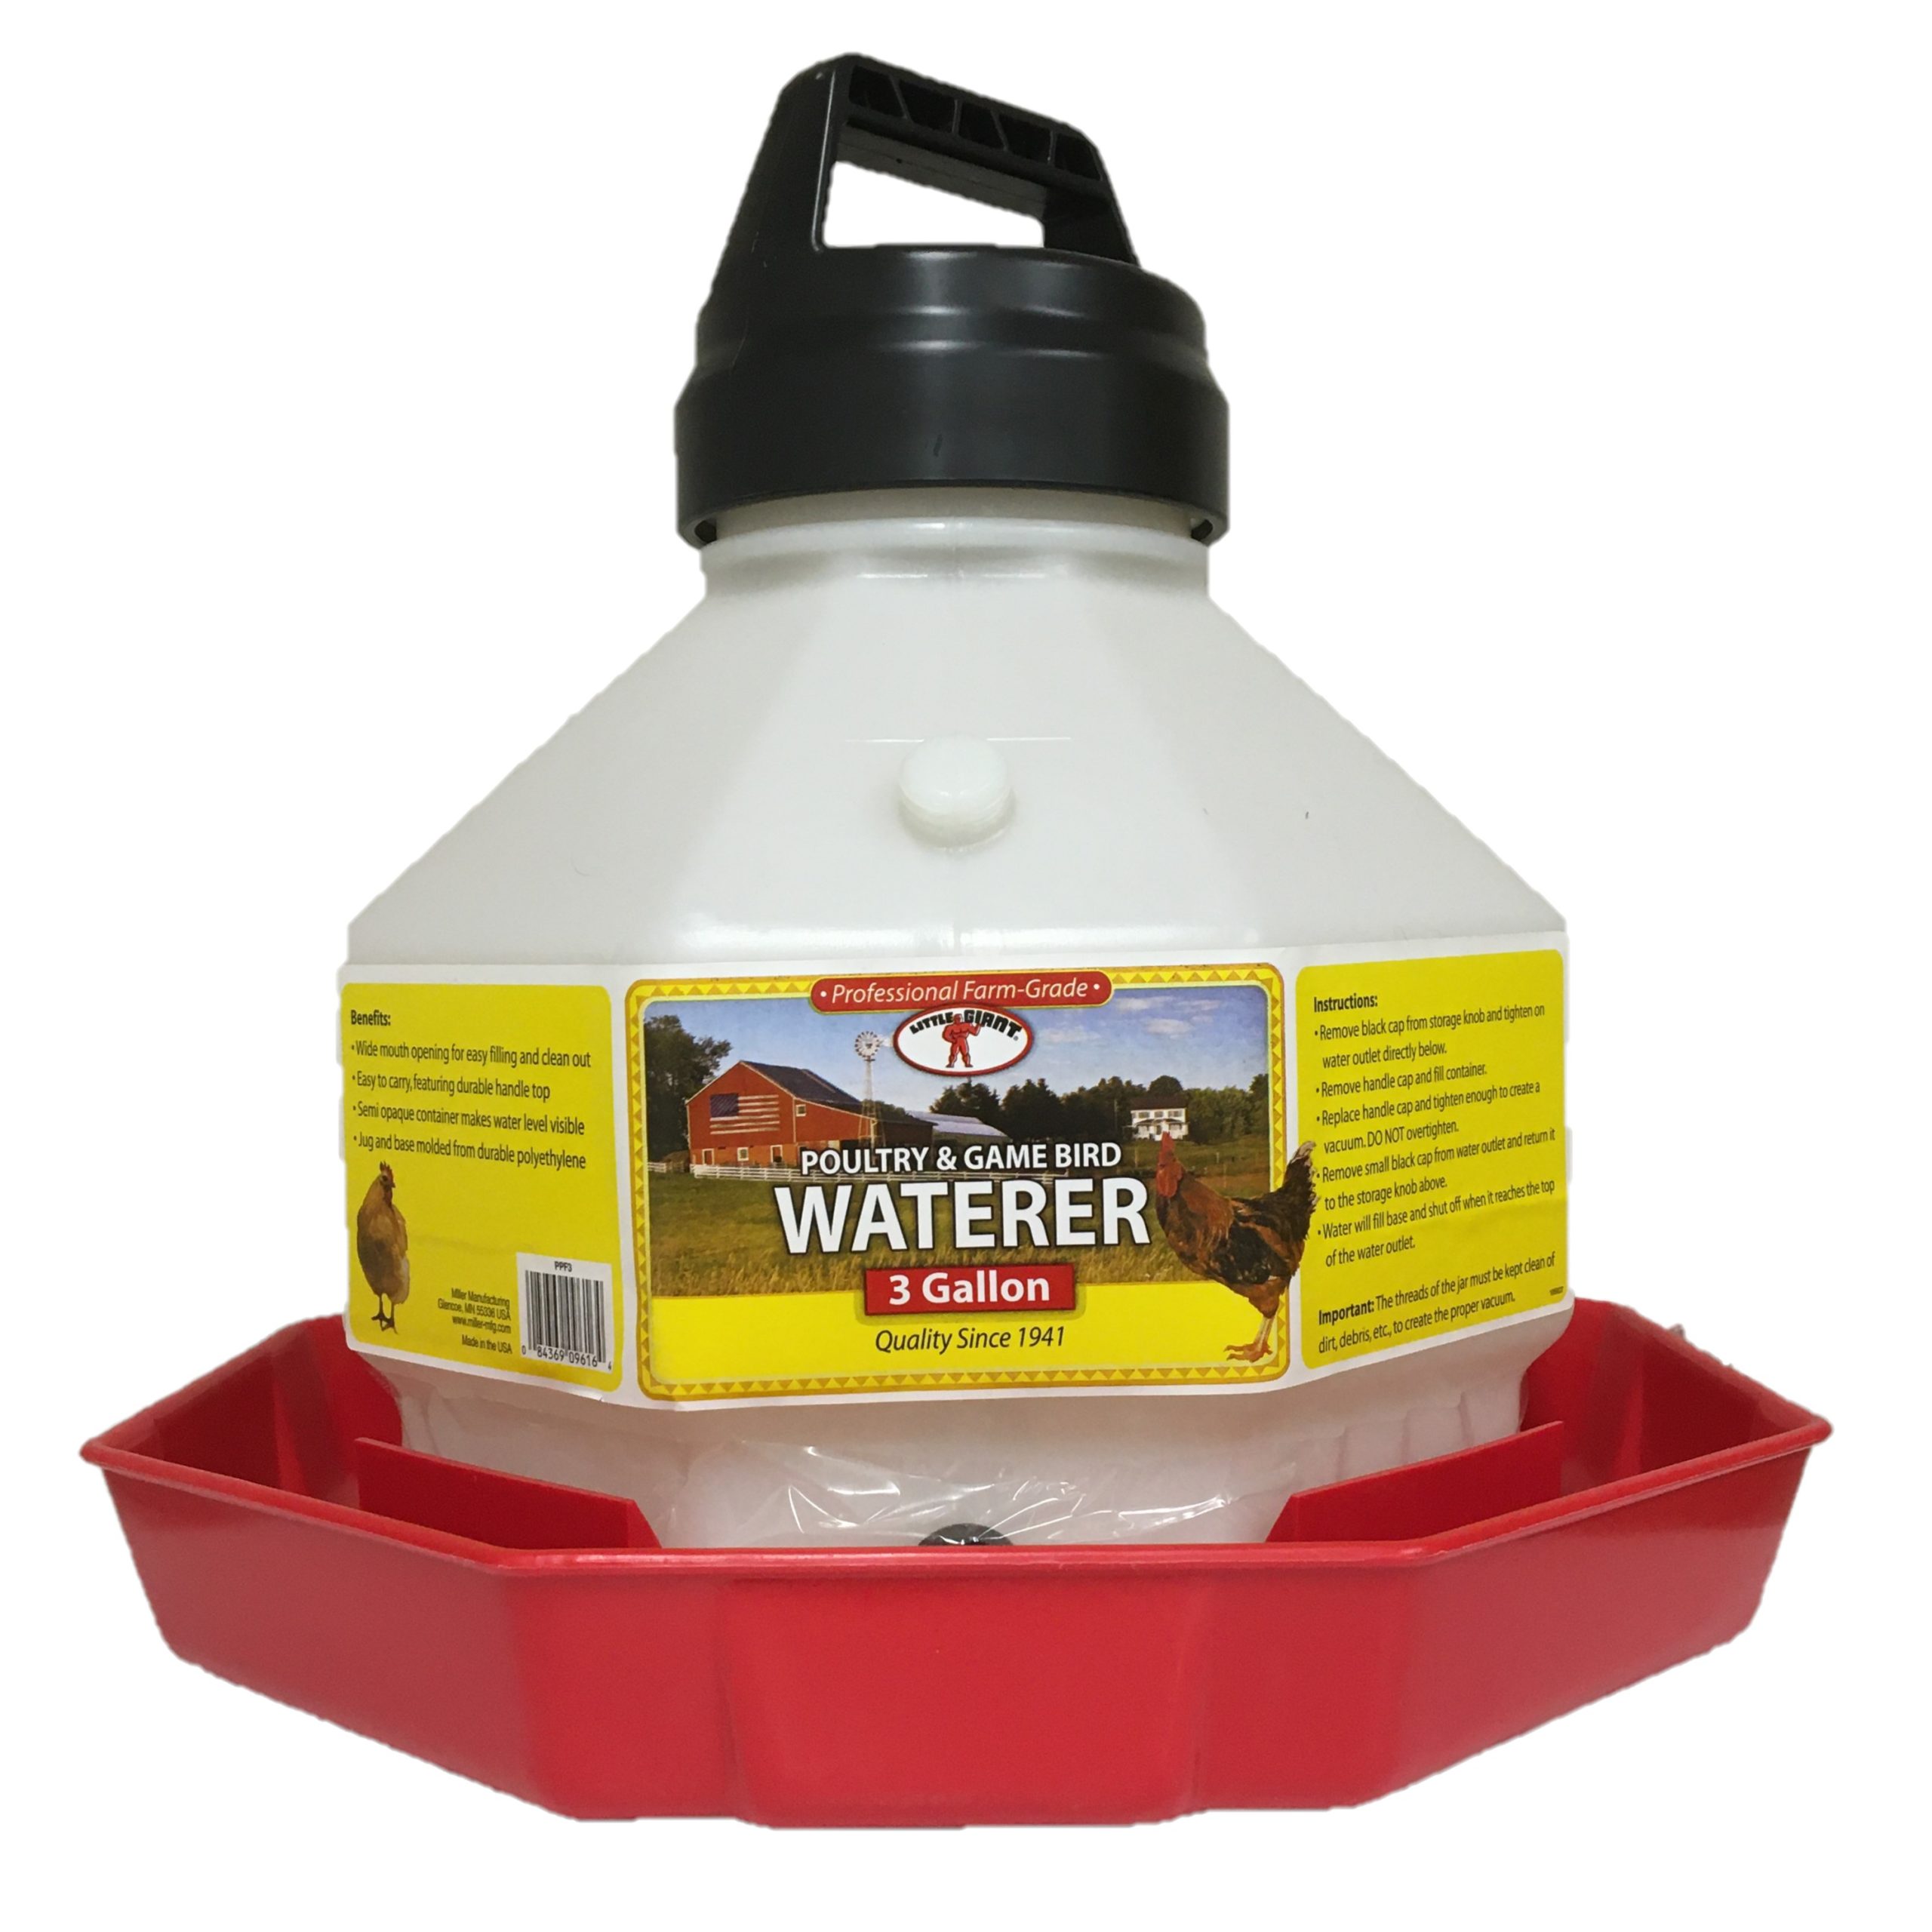 Poultry & Game Bird Waterer – 3 Gallon